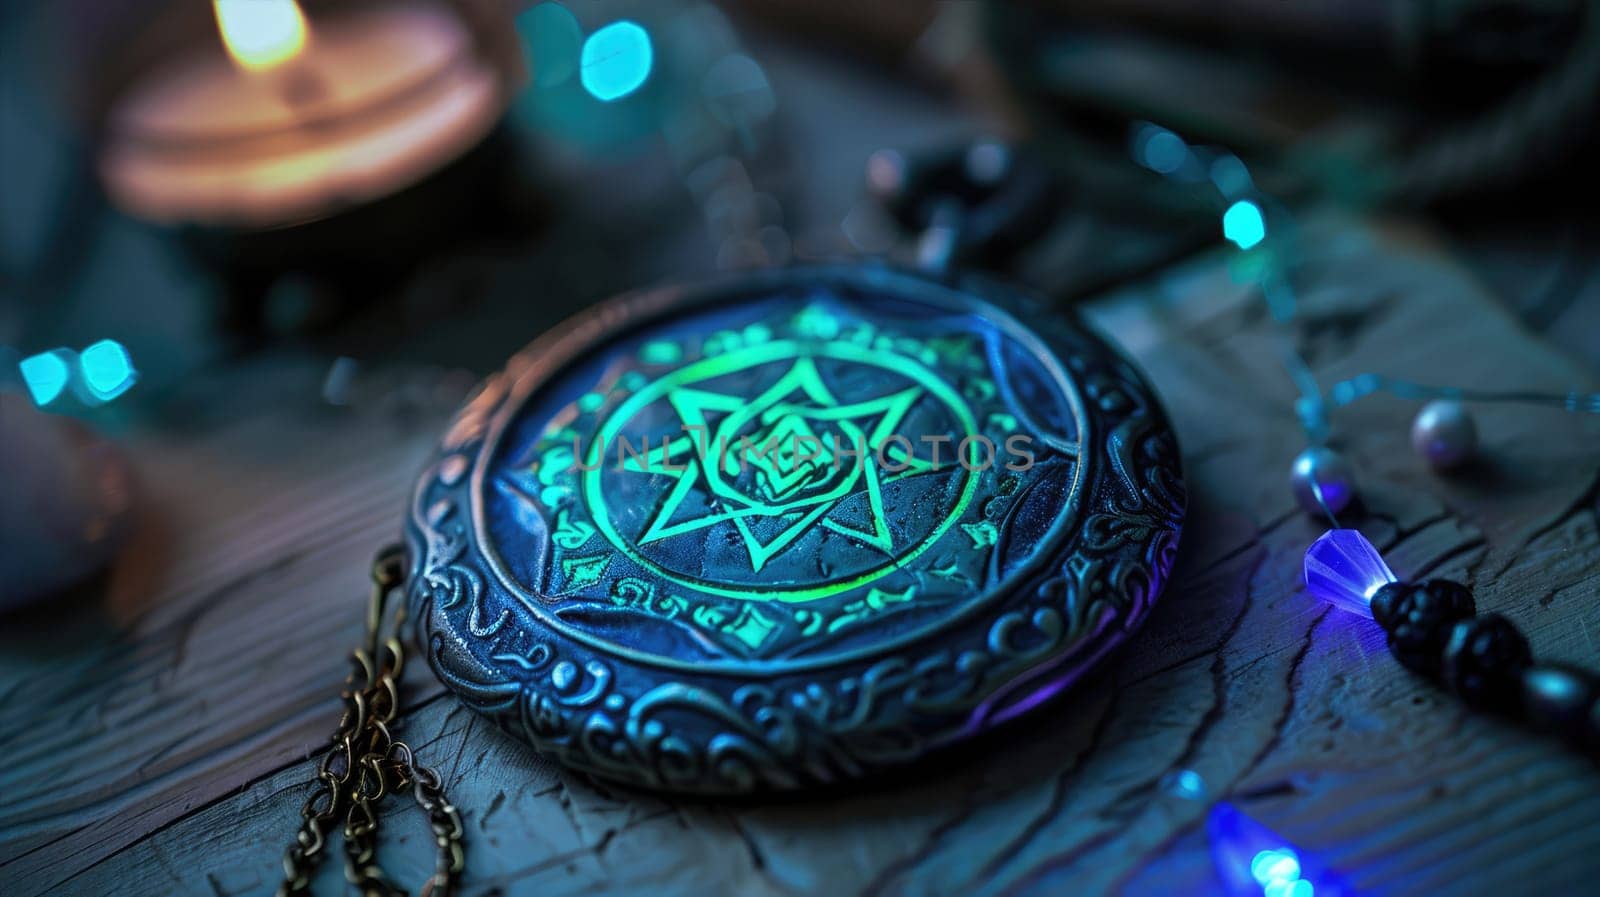 The amulet for protection against dark forces and negativity. Magical glow by natali_brill